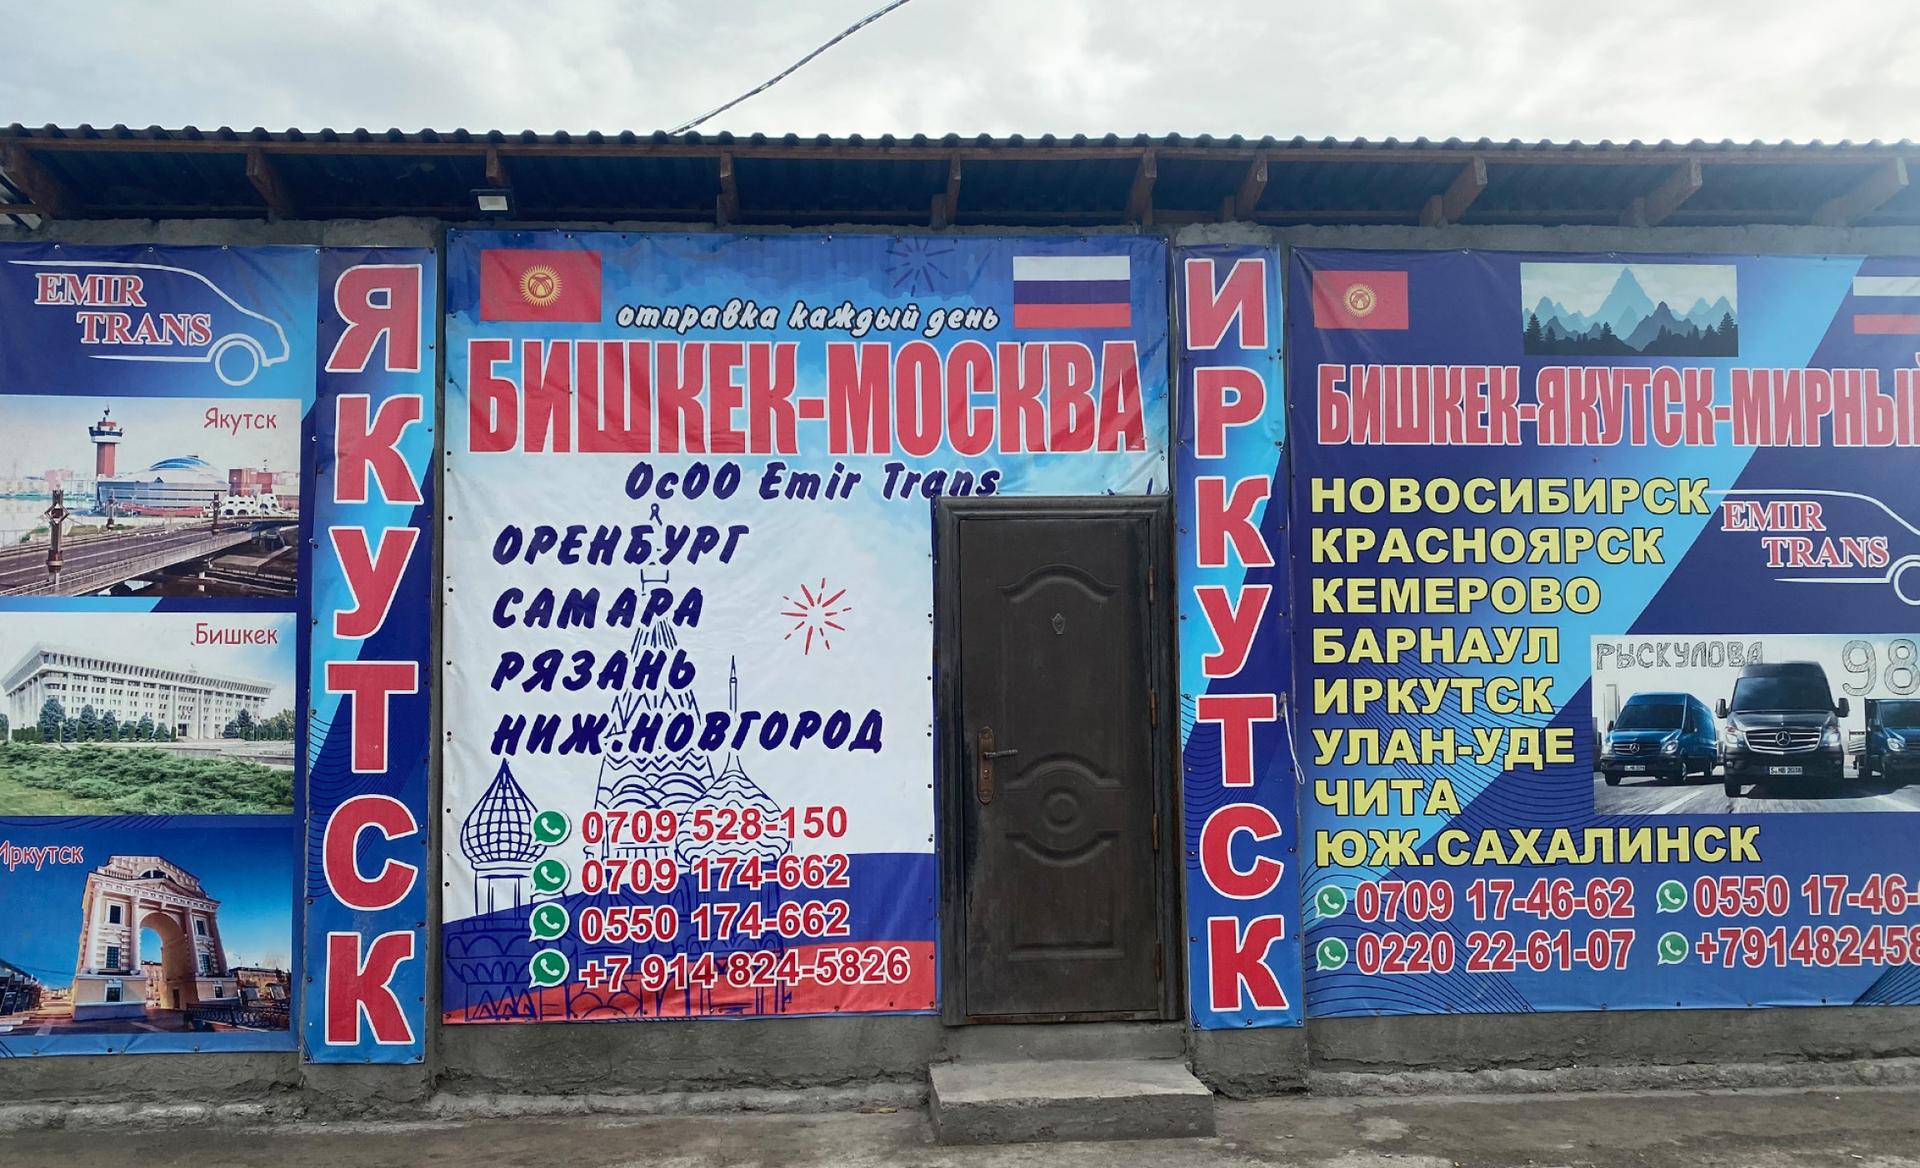 In Bishkek, the capital of Kyrgyzstan, businesses advertise shared taxis that bring migrant workers to cities all over Russia